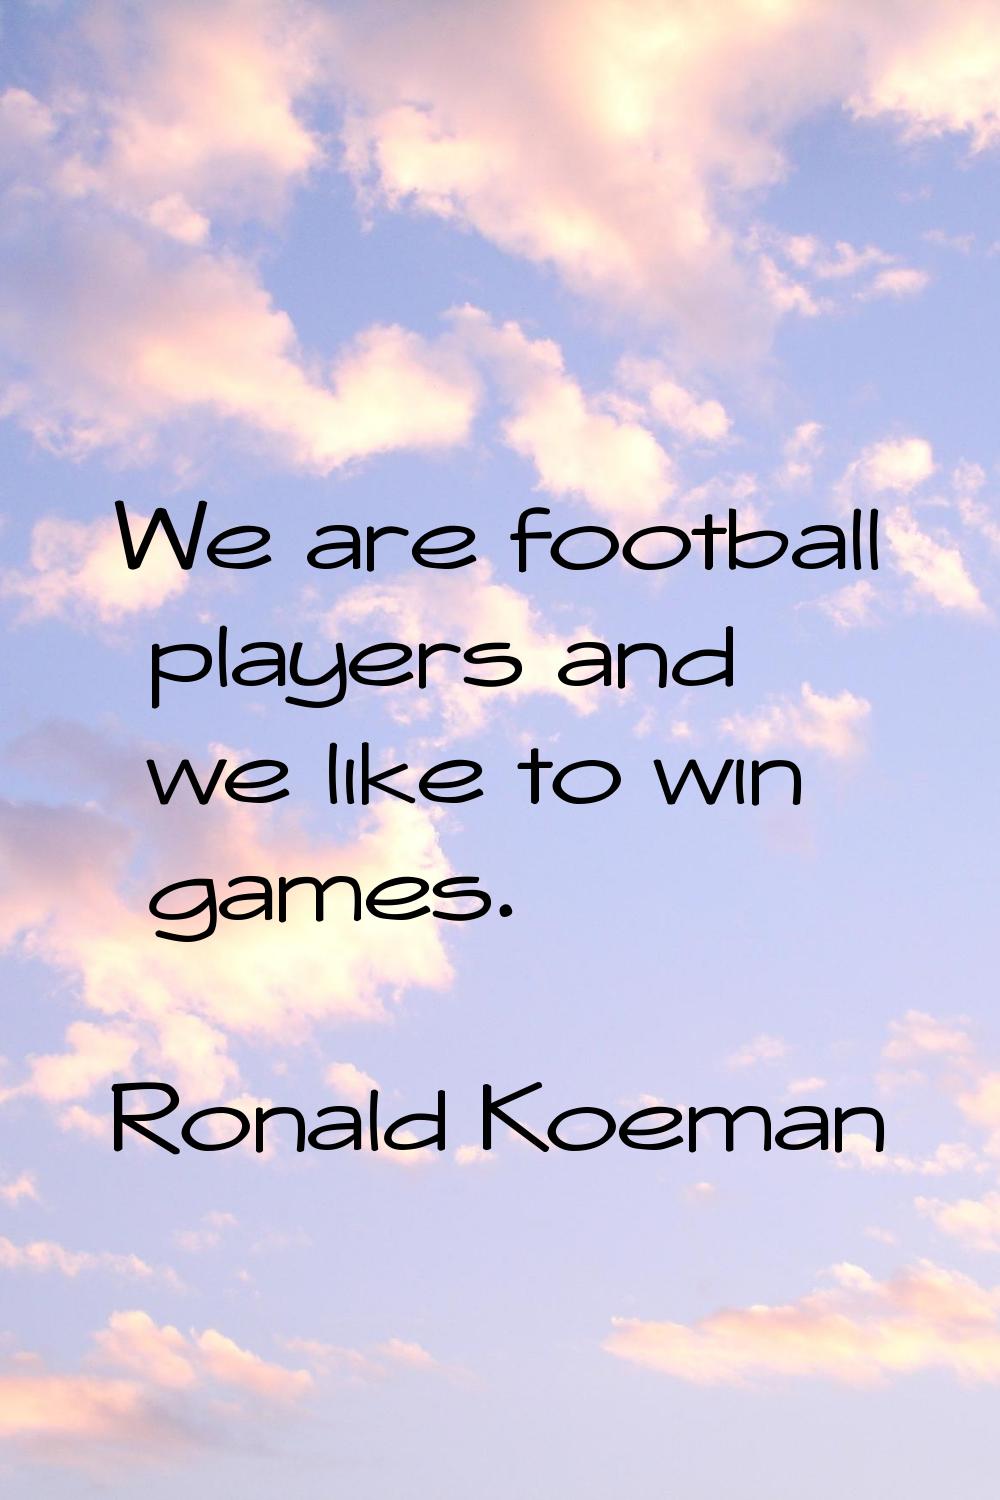 We are football players and we like to win games.